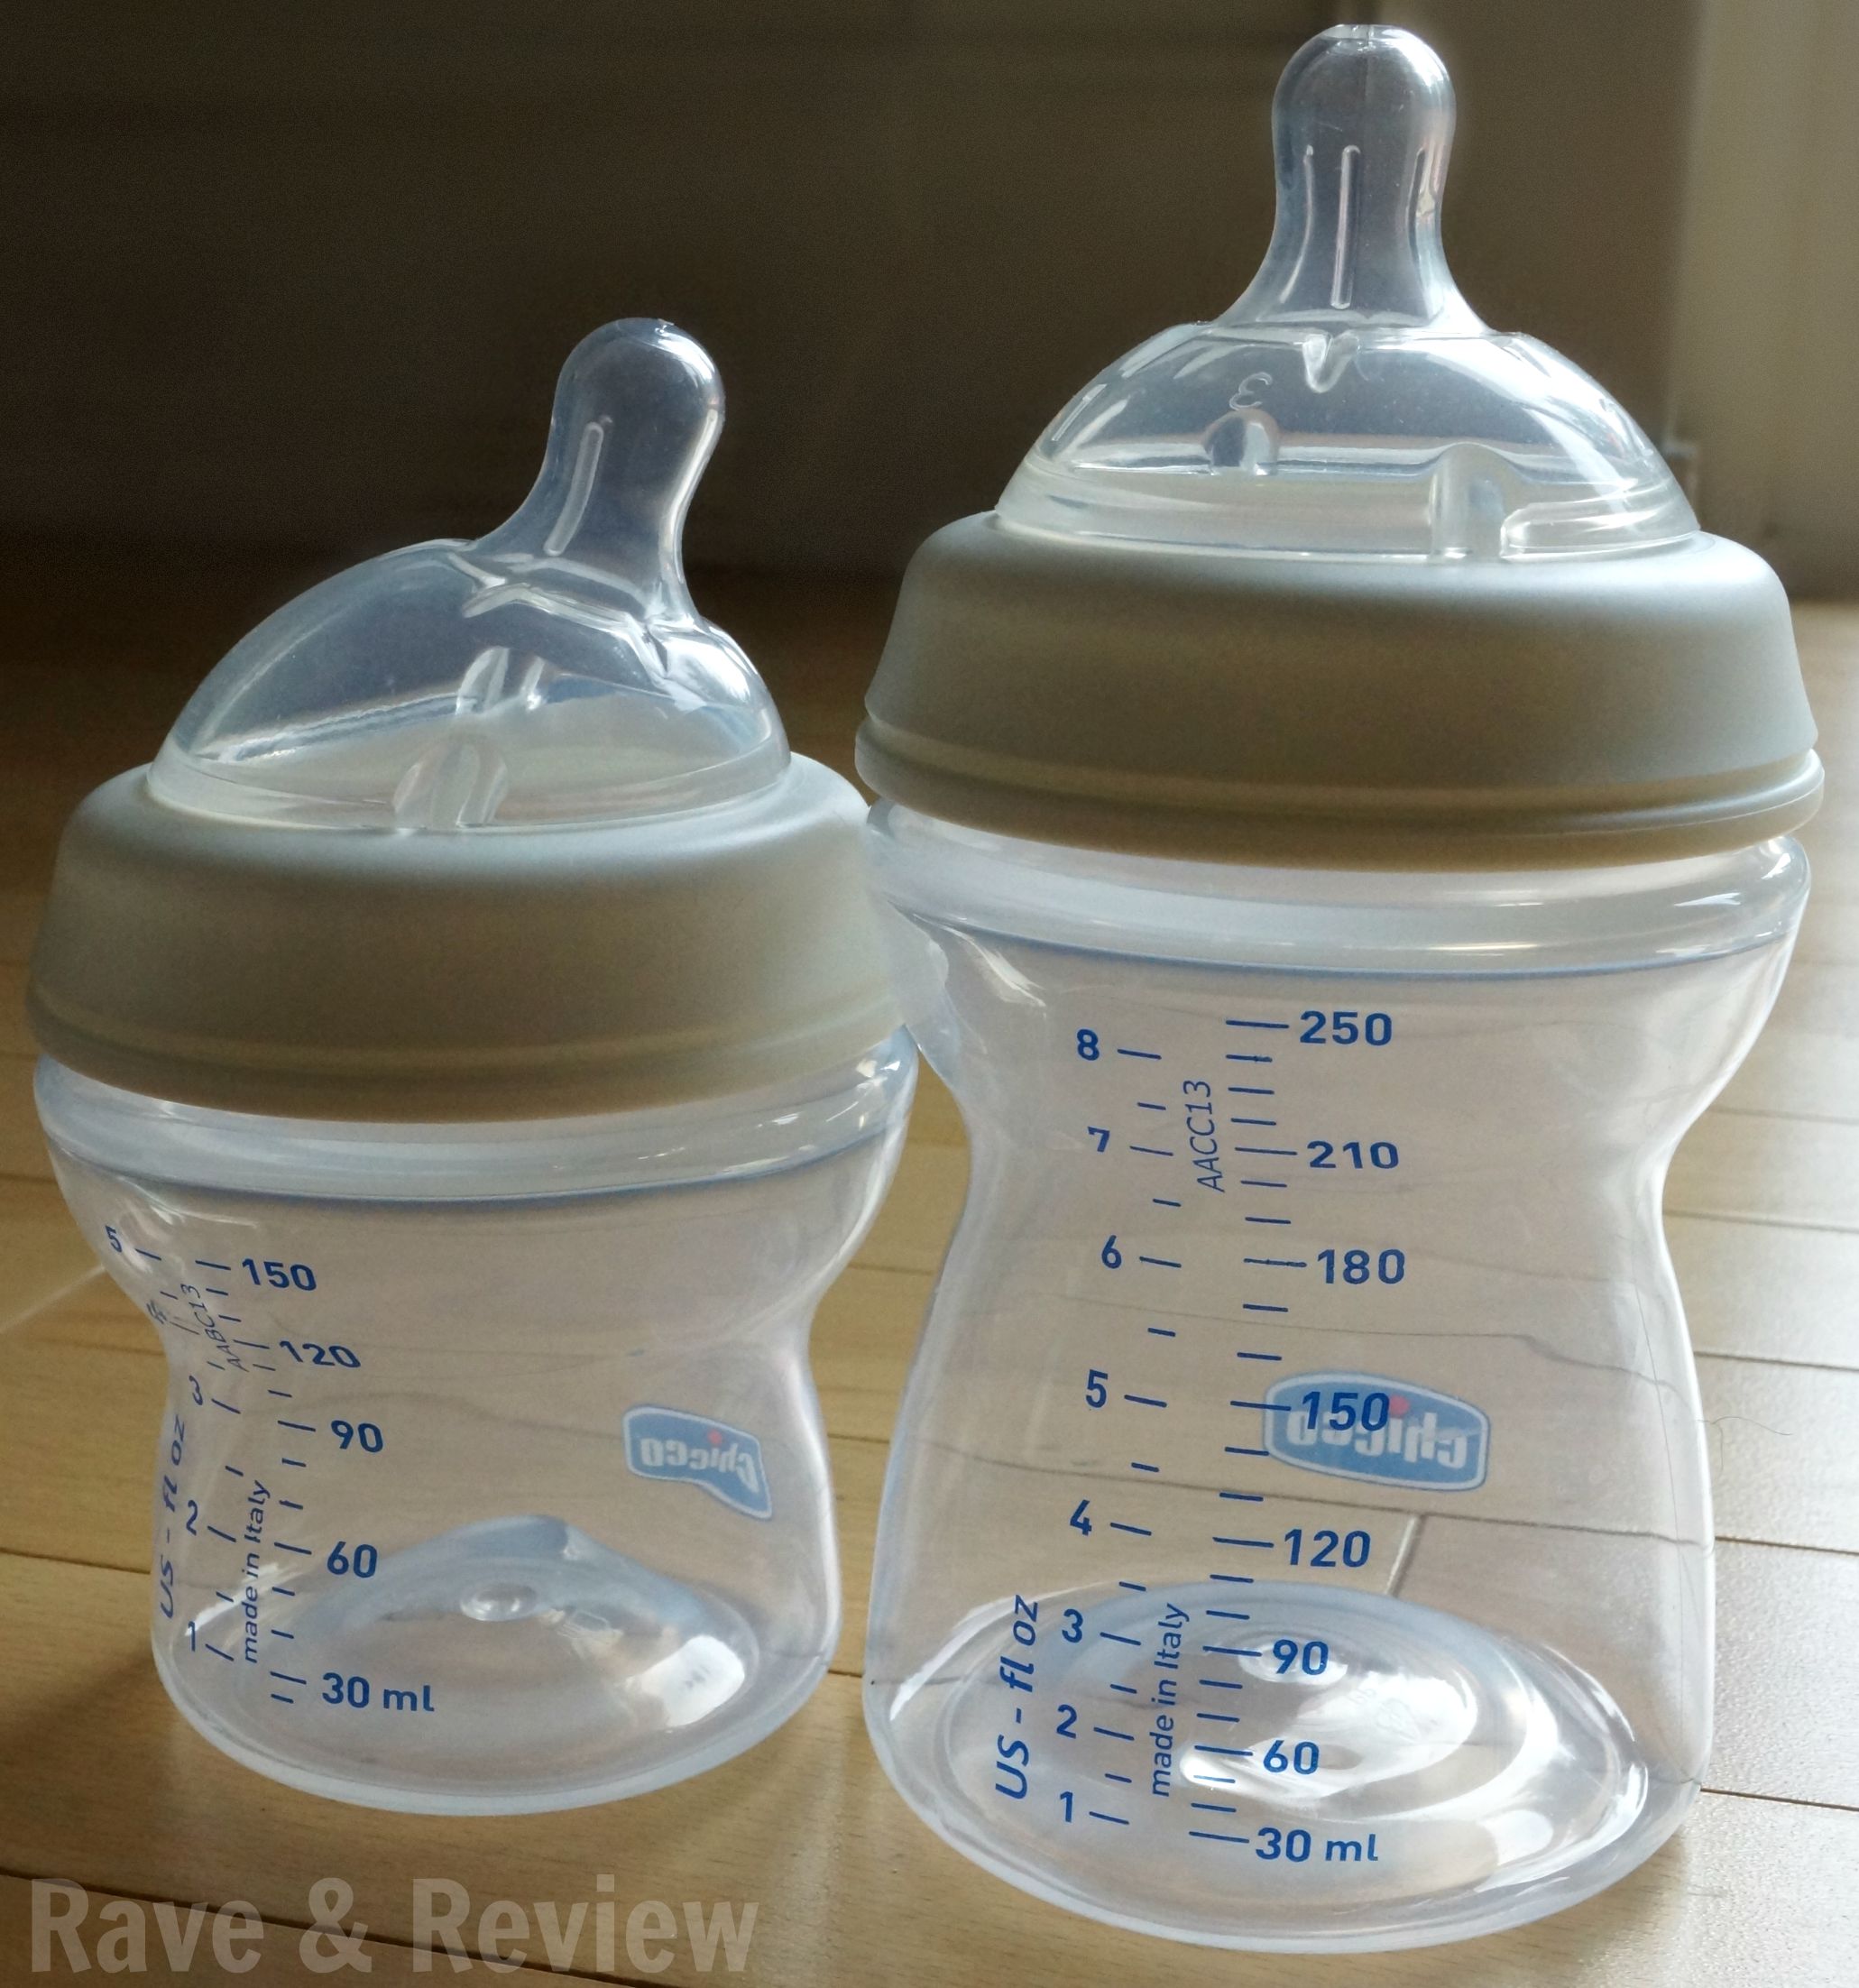 chicco feeding bottle review